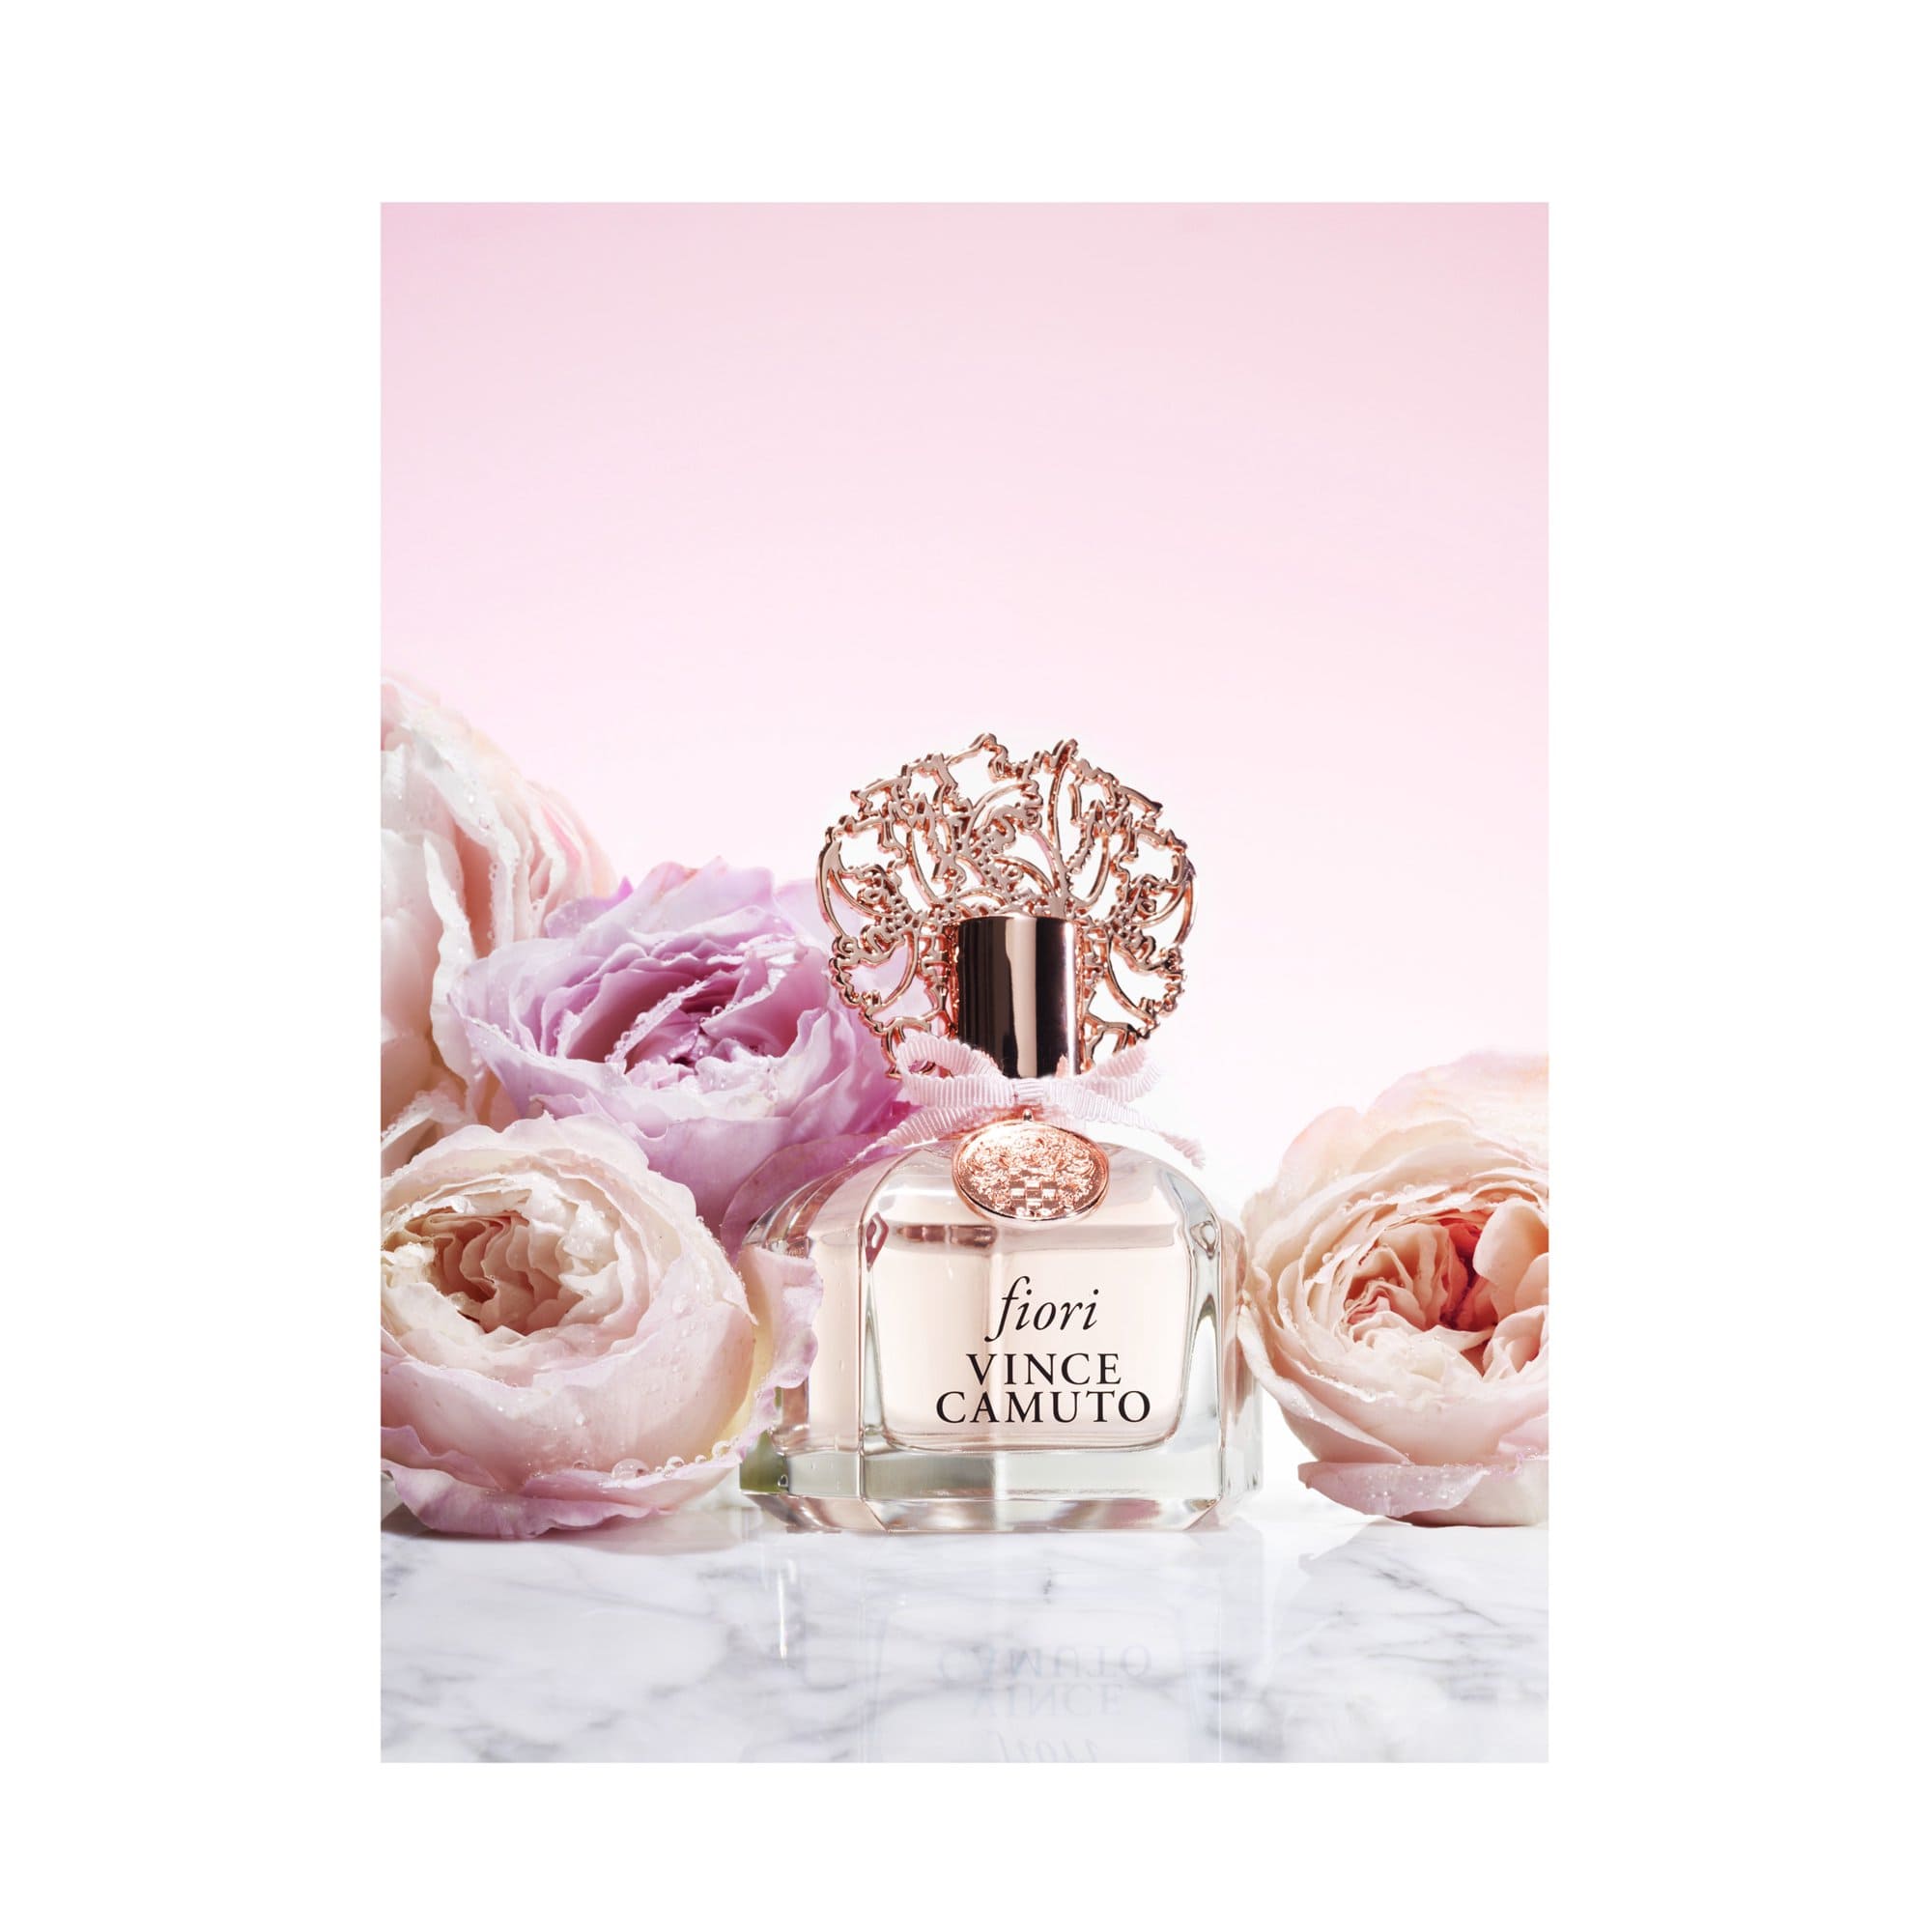 VINCE CAMUTO FIORI by VINCE CAMUTO 